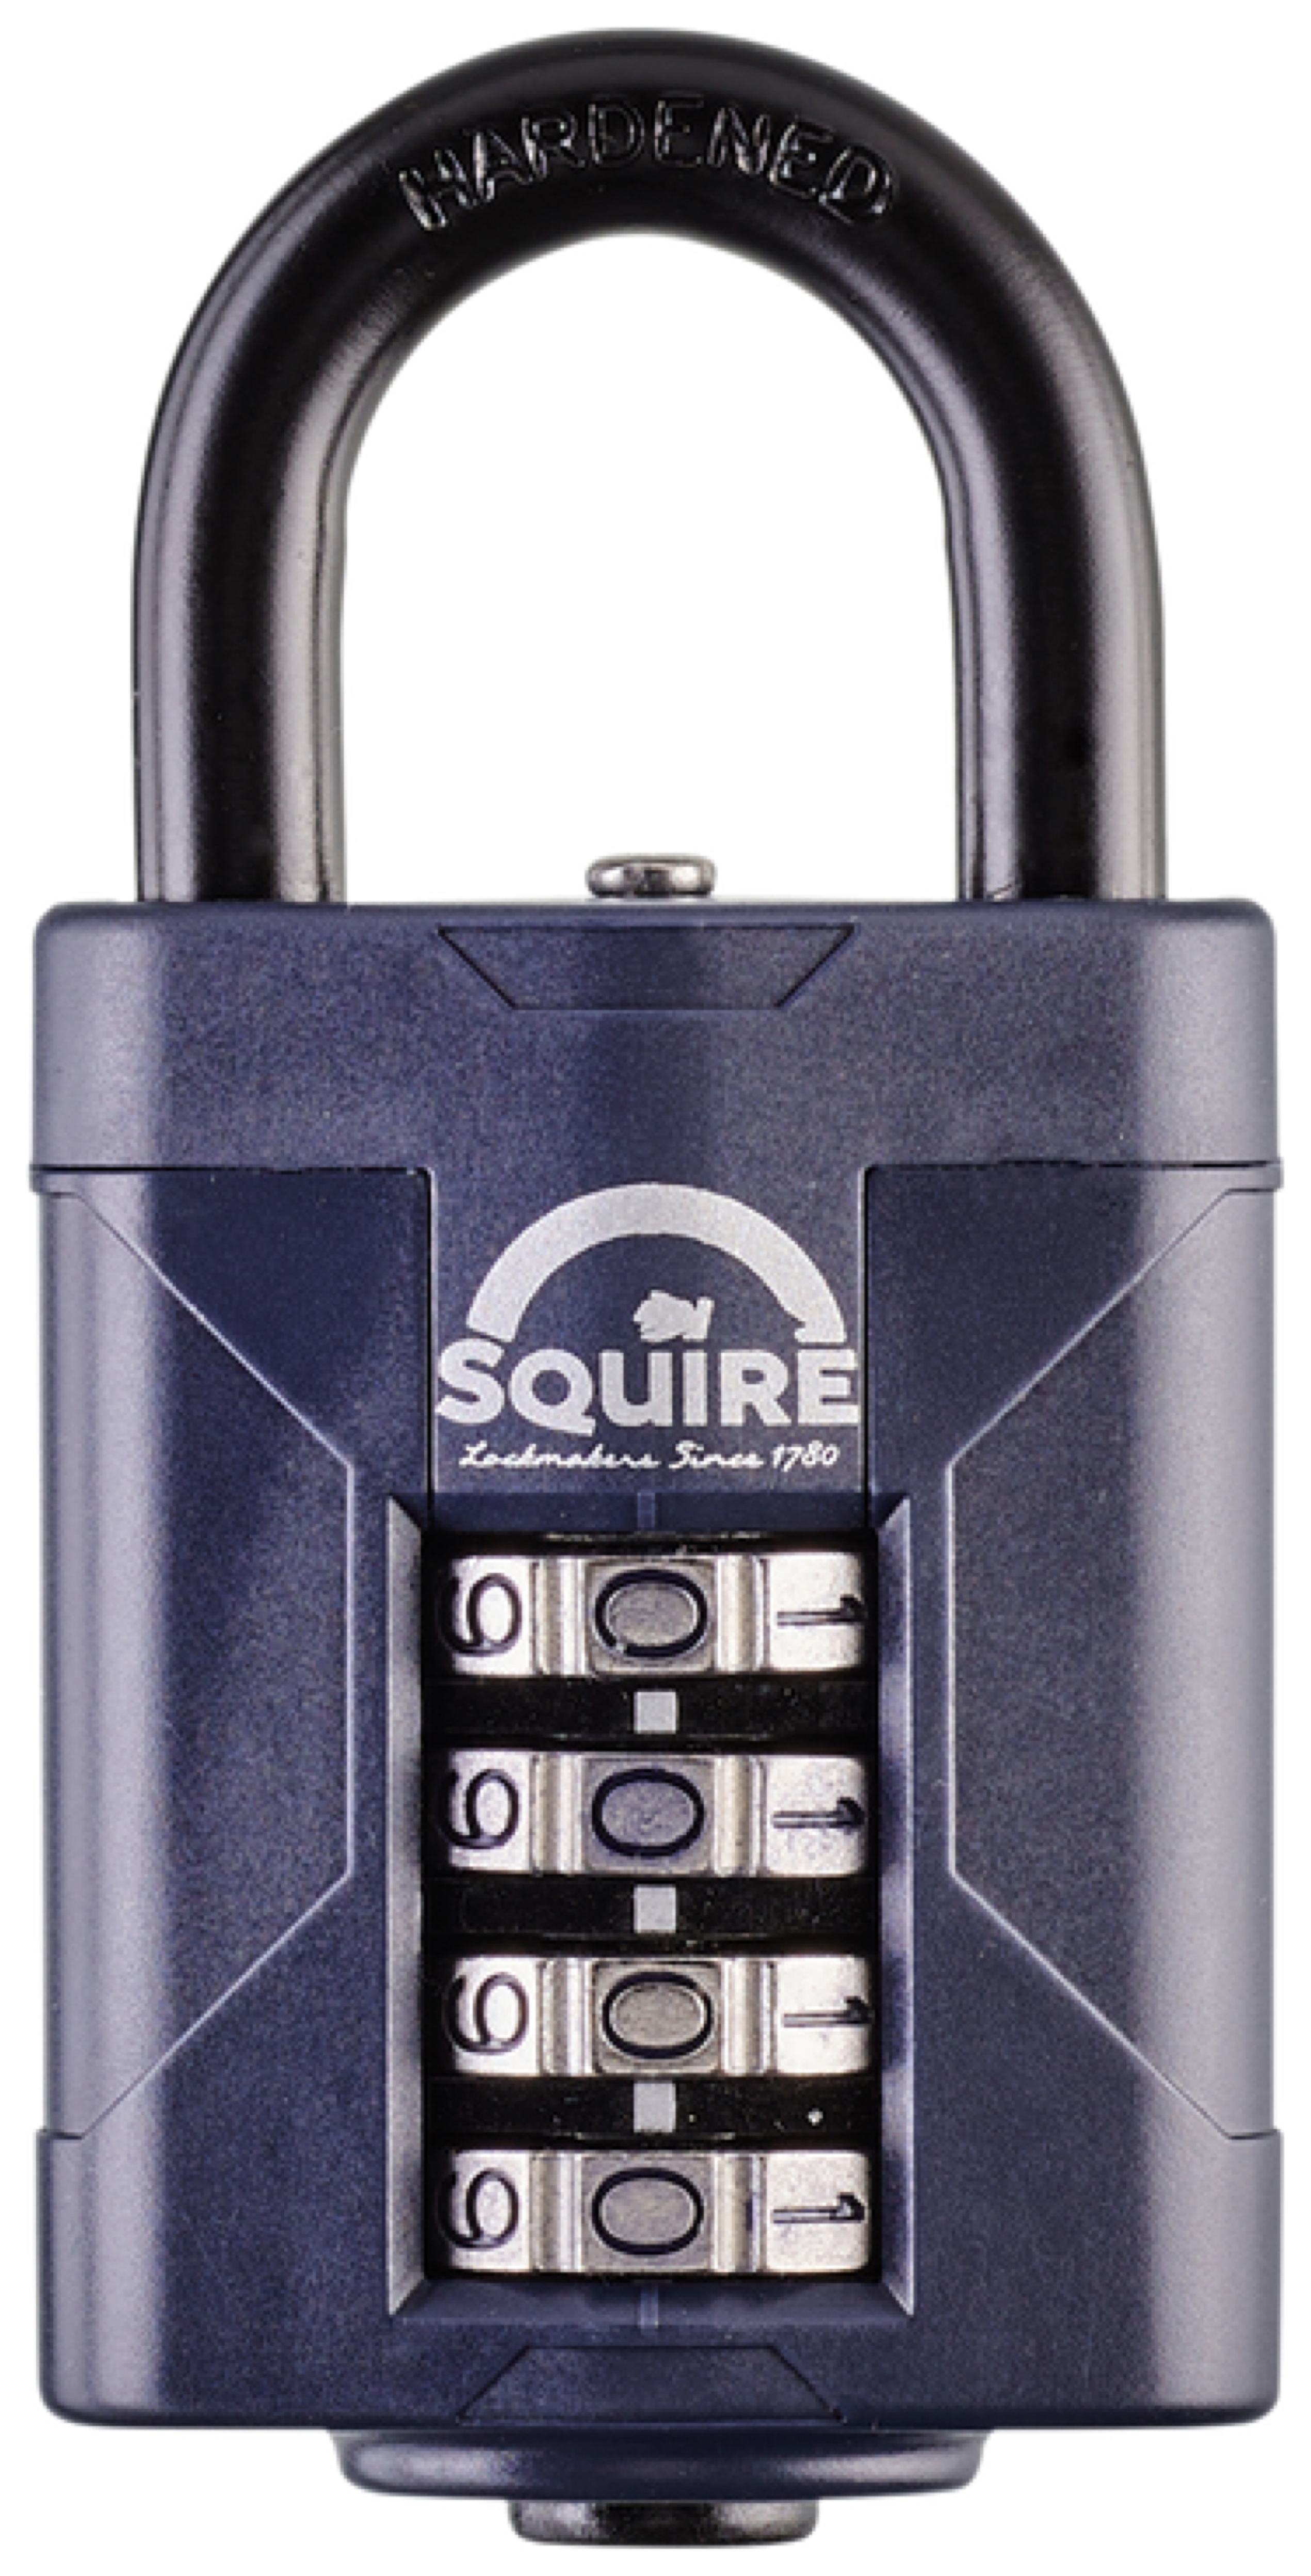 Squire Combination Padlock with Hardened Steel Shackle - 50mm